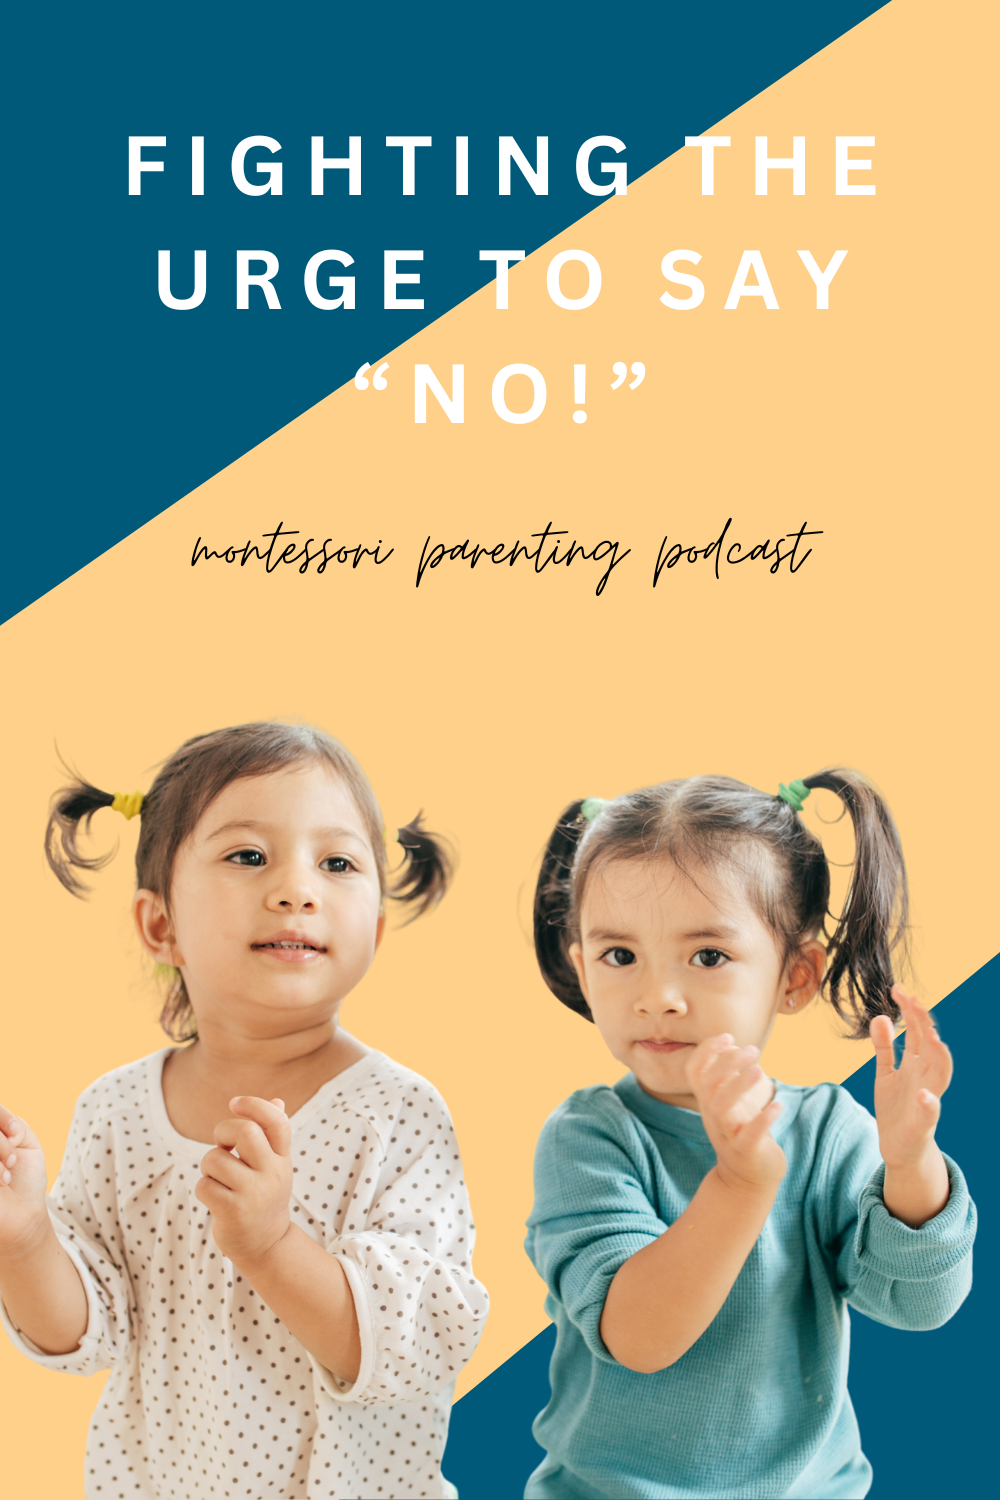 So many of were parented with traditional methods of shame and control which can lead us to want to say "no" to our own children. In this Montessori parenting podcast, we explore our desire to say no with our children's very real need to explore. We deep dive into how to balance our needs and our childrens.